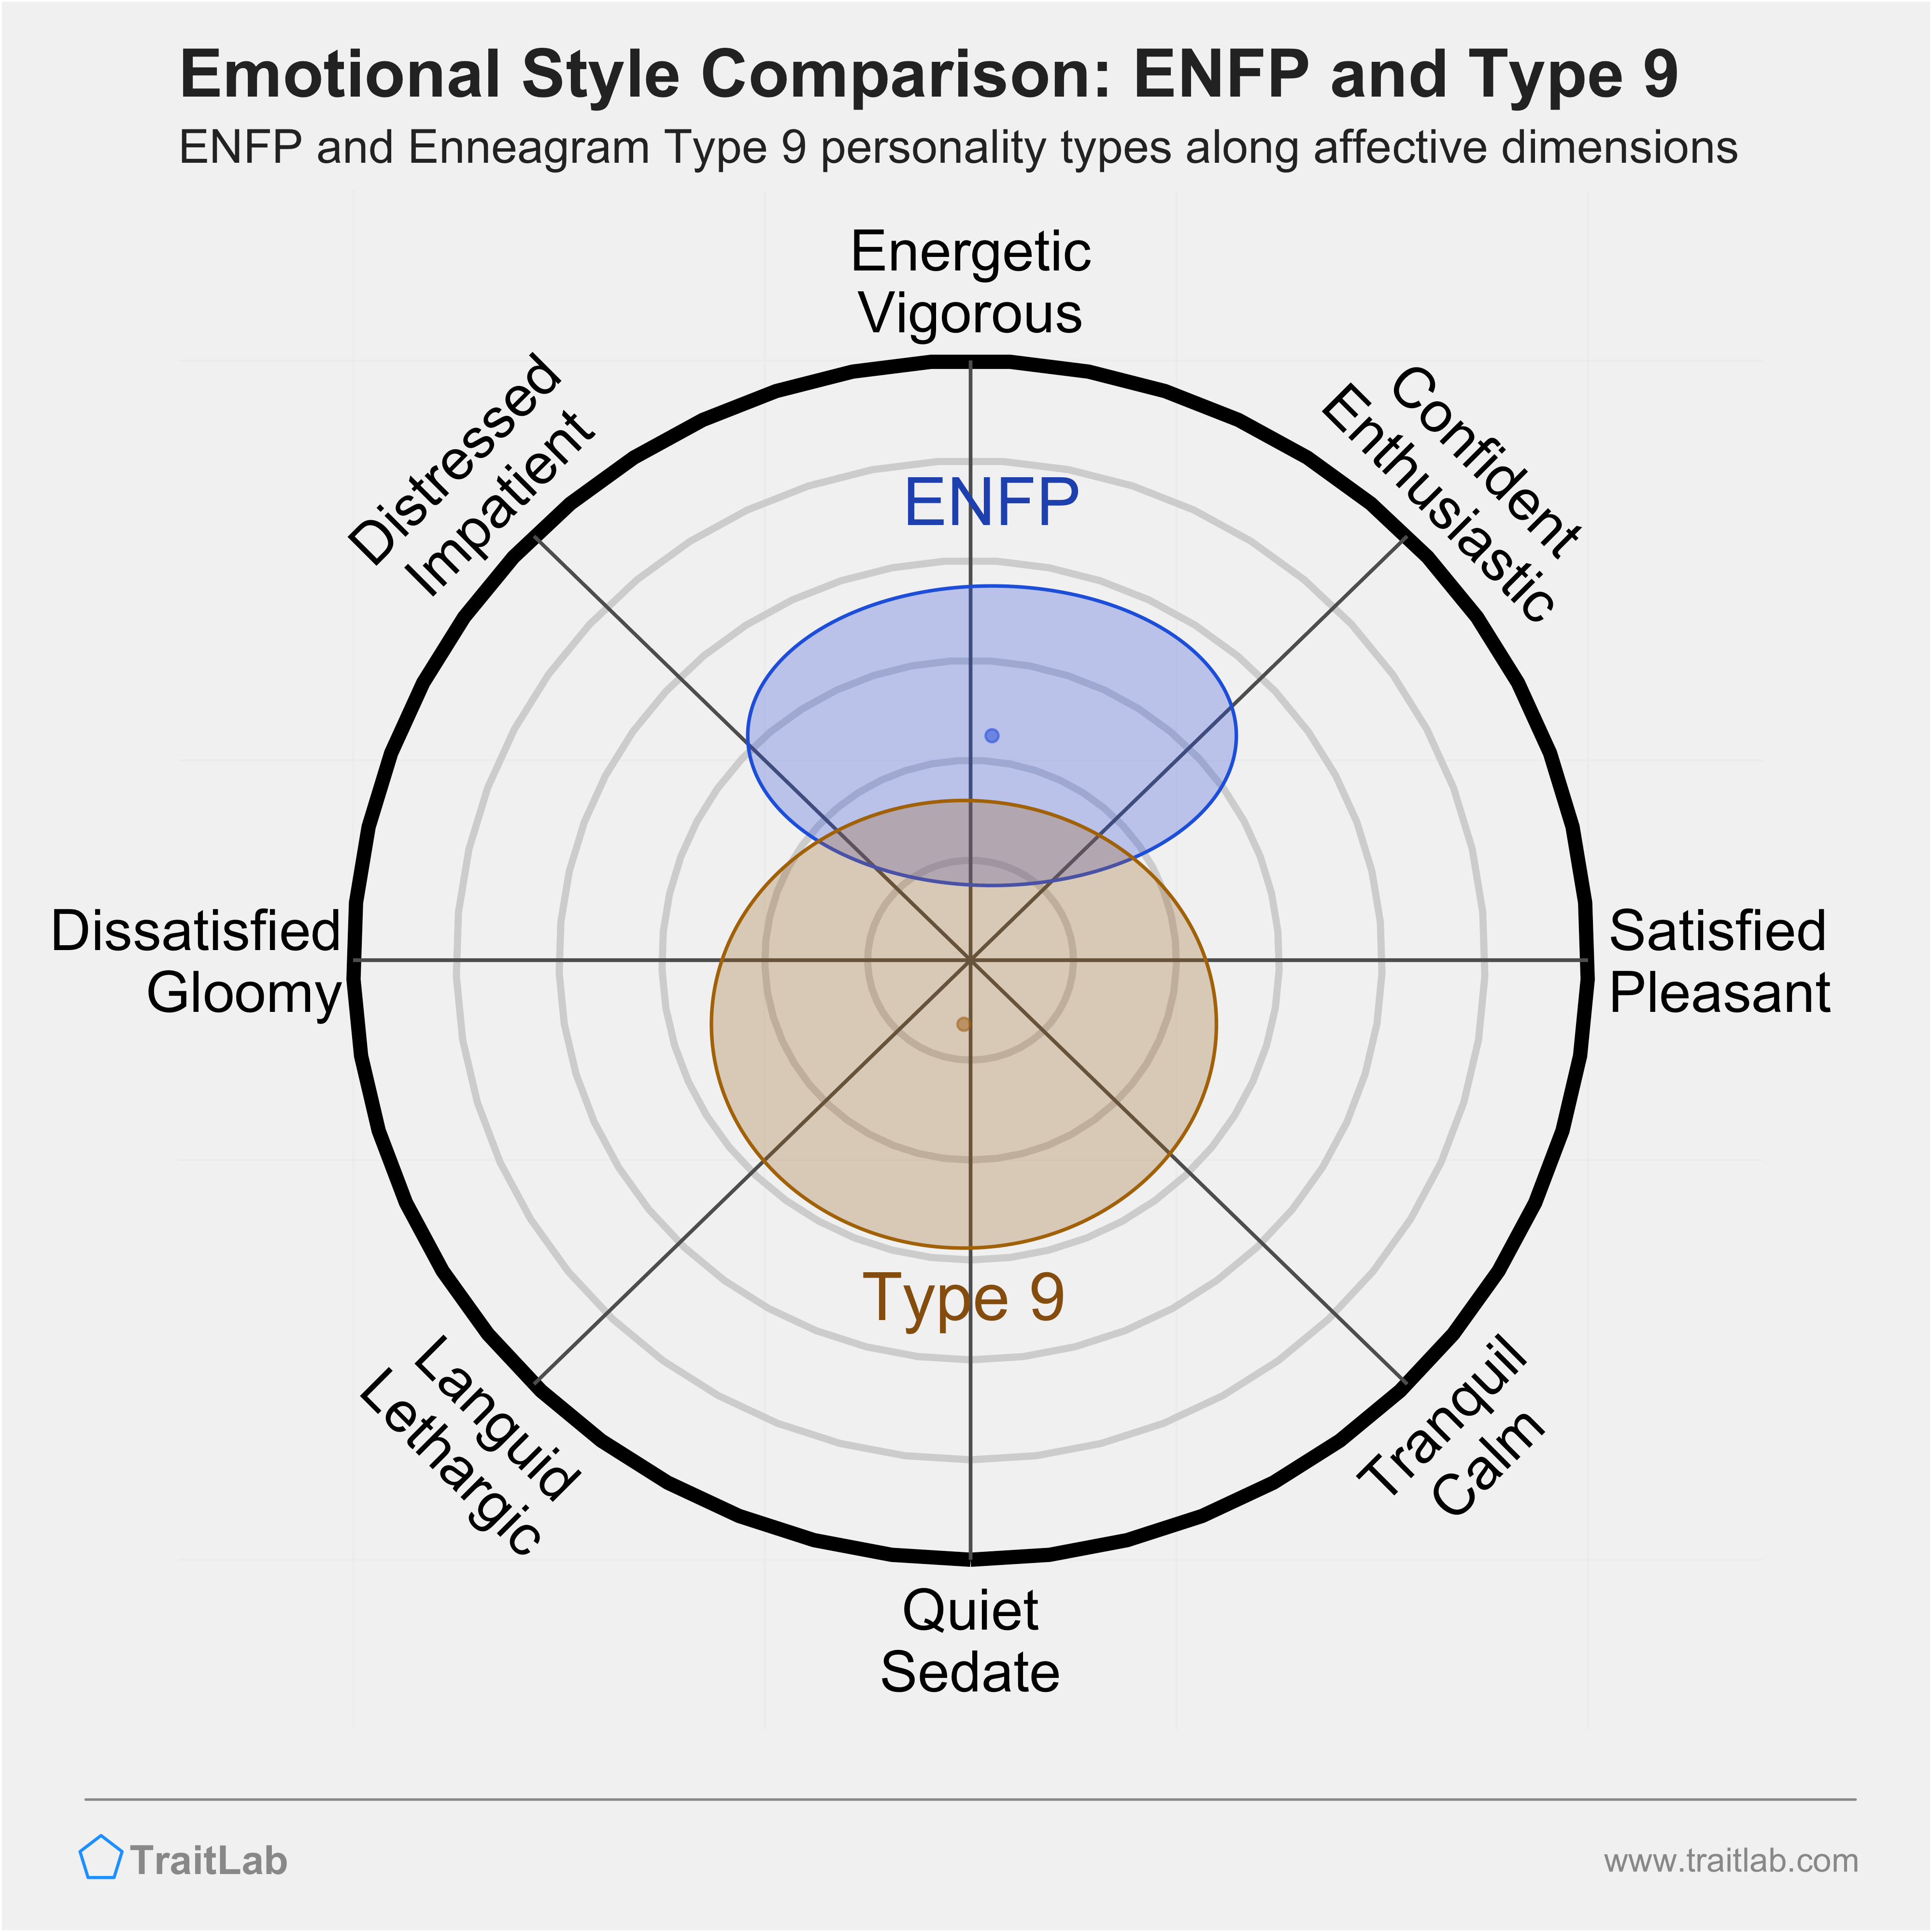 ENFP and Type 9 comparison across emotional (affective) dimensions